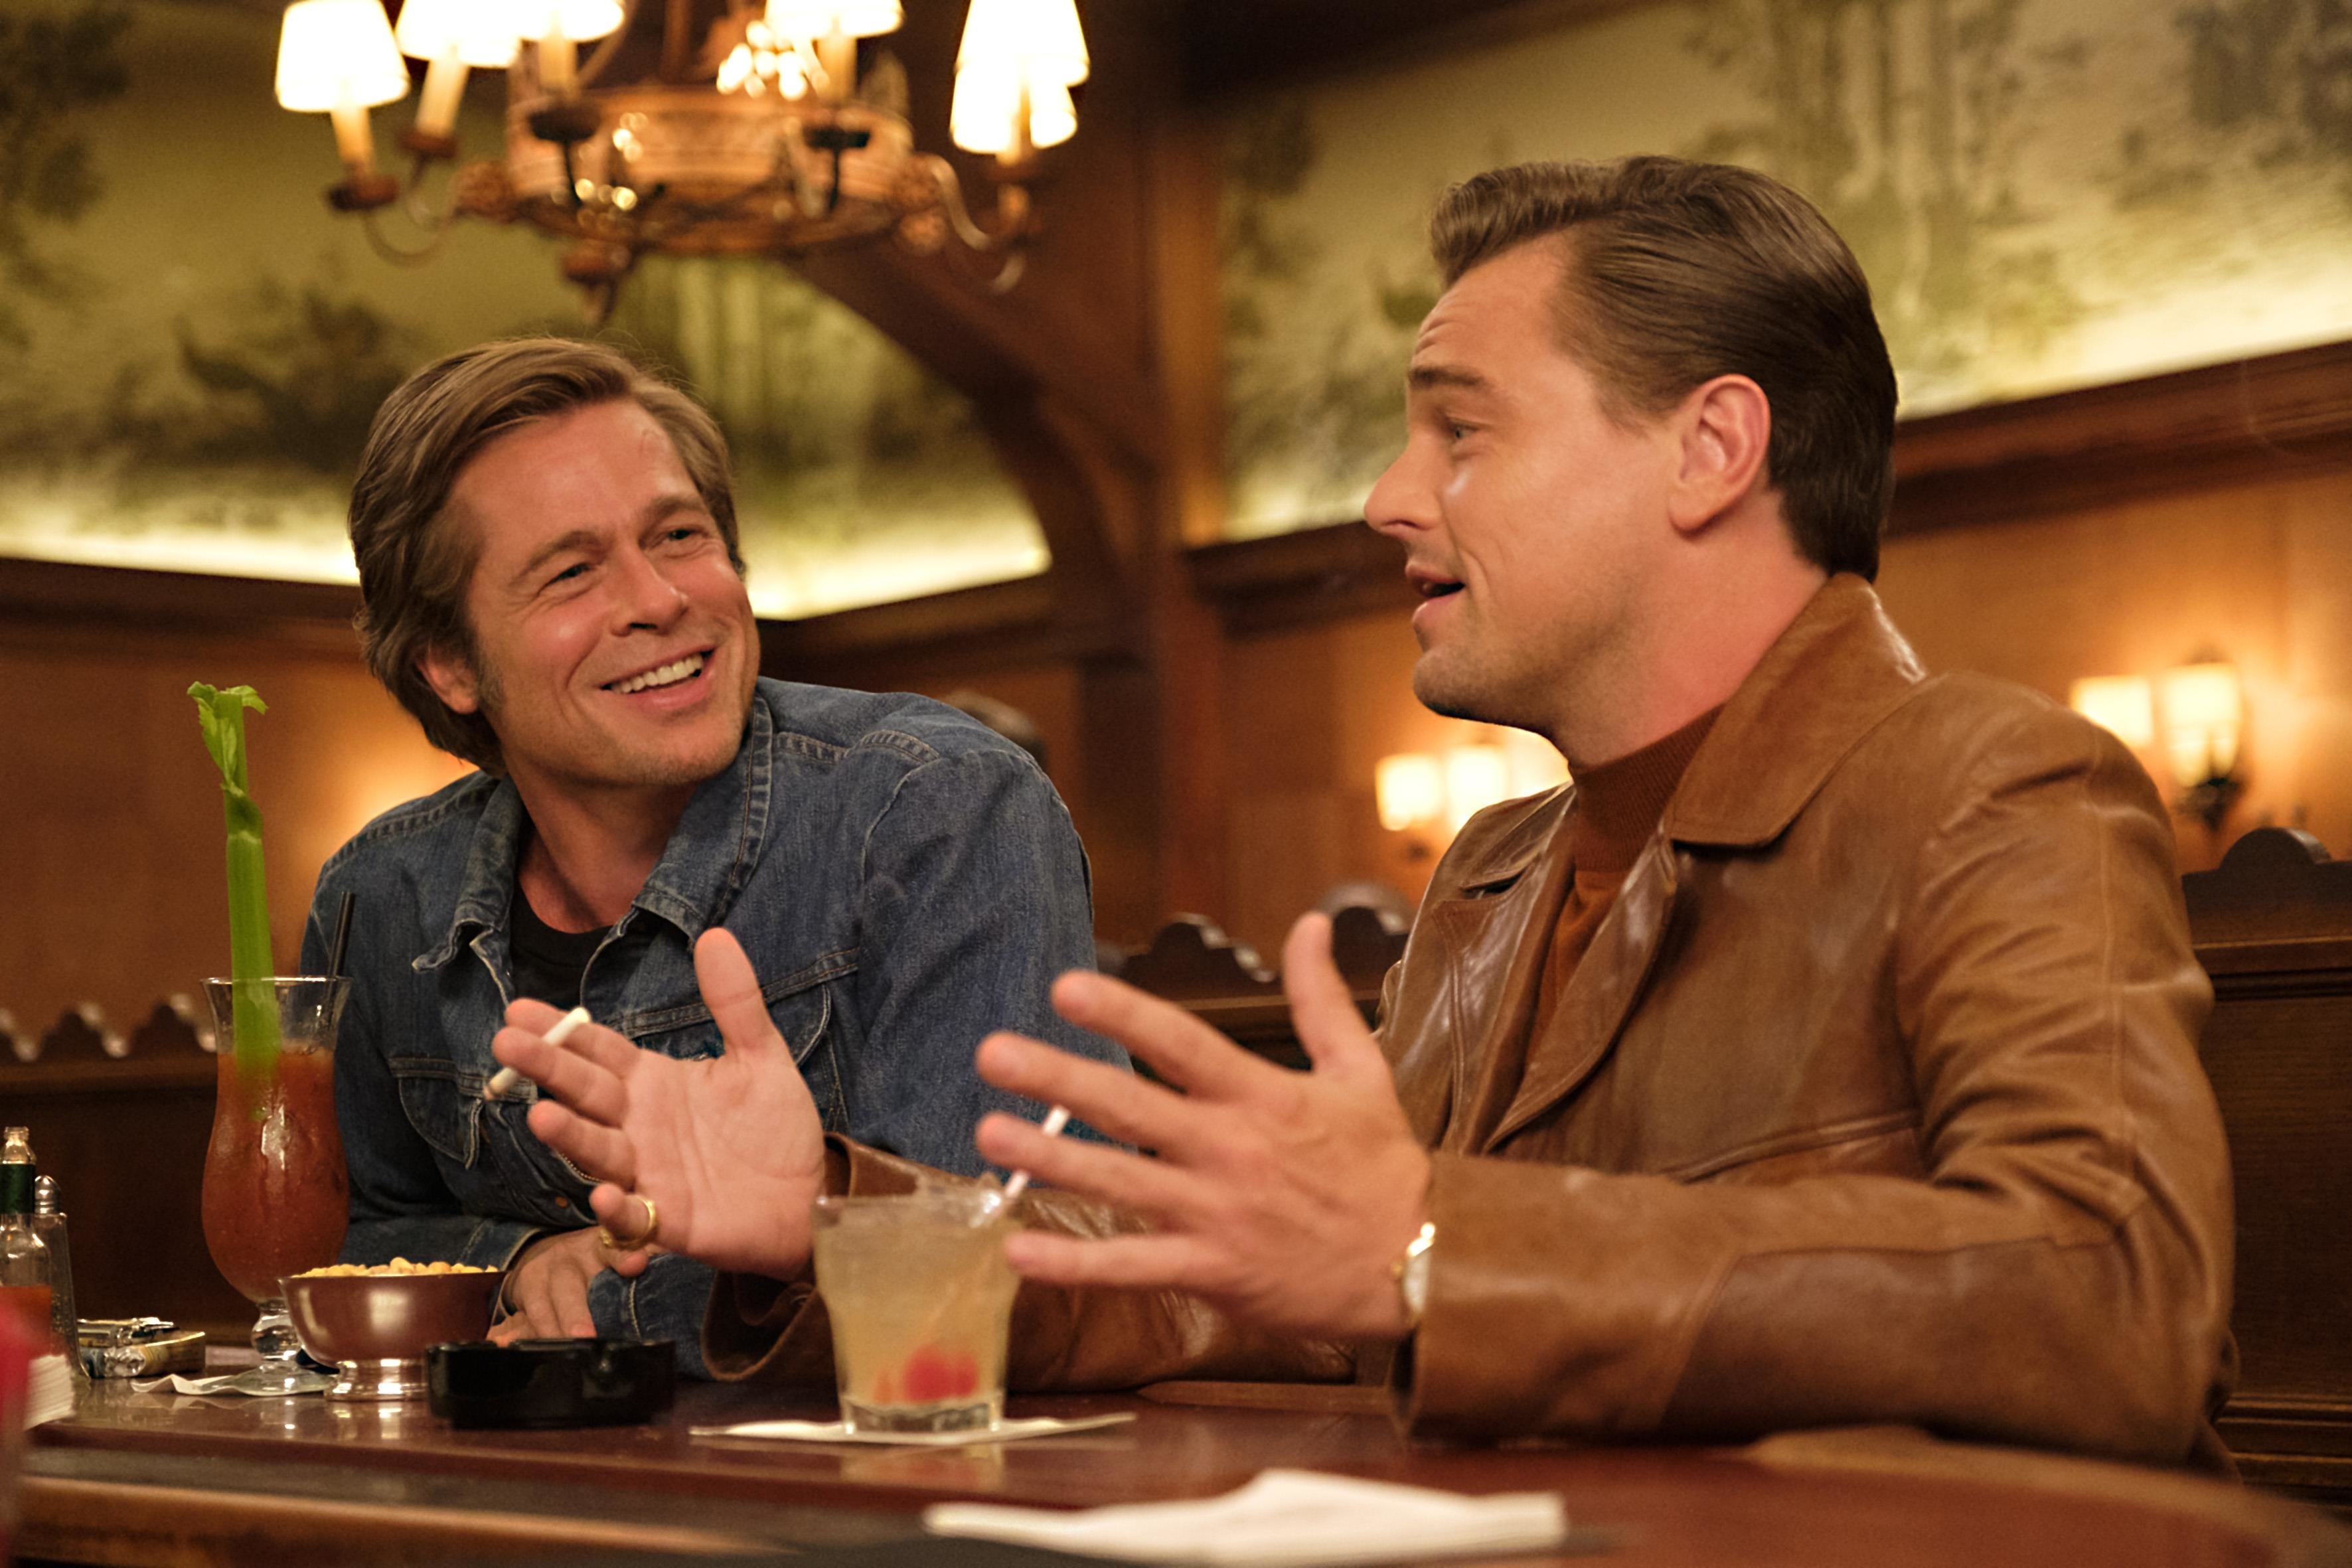 Image du film Once Upon a Time... in Hollywood 59270225-cc5b-48a7-aa09-600b5a7541a9